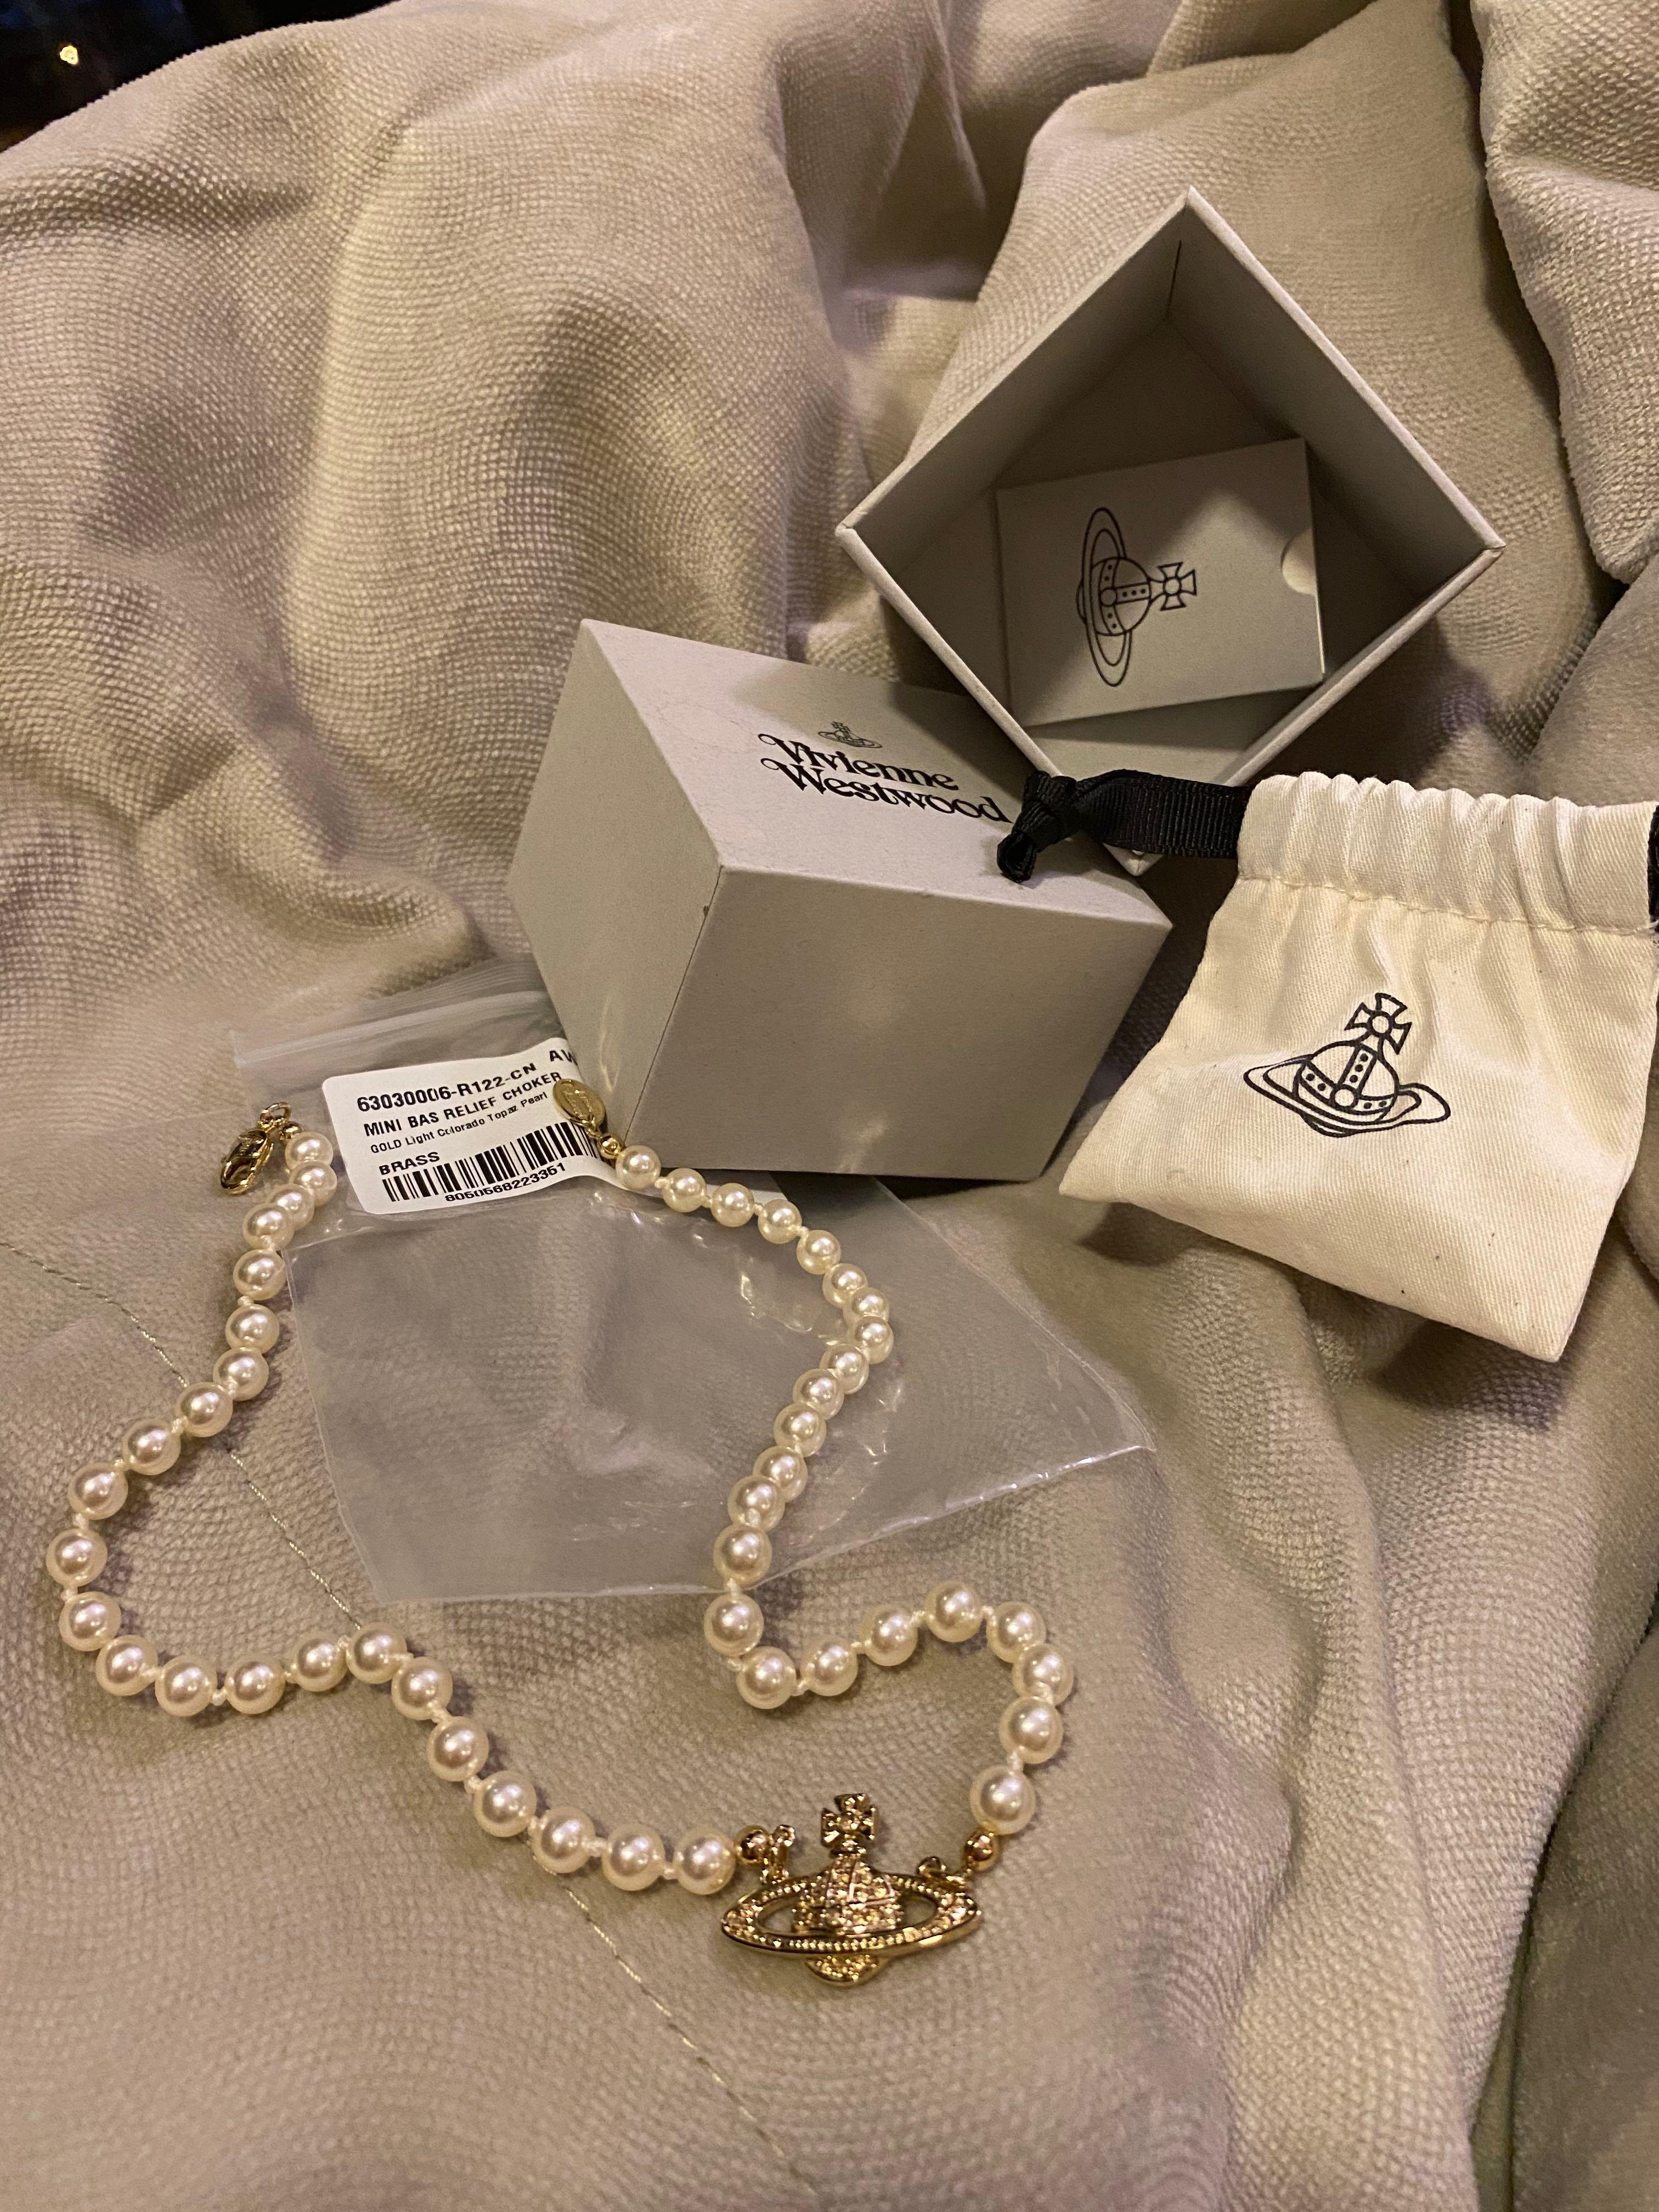 VIVIENNE WESTWOOD MINI BAS RELIEF GOLD CHOKER UNBOXING & REVIEW - YouTube